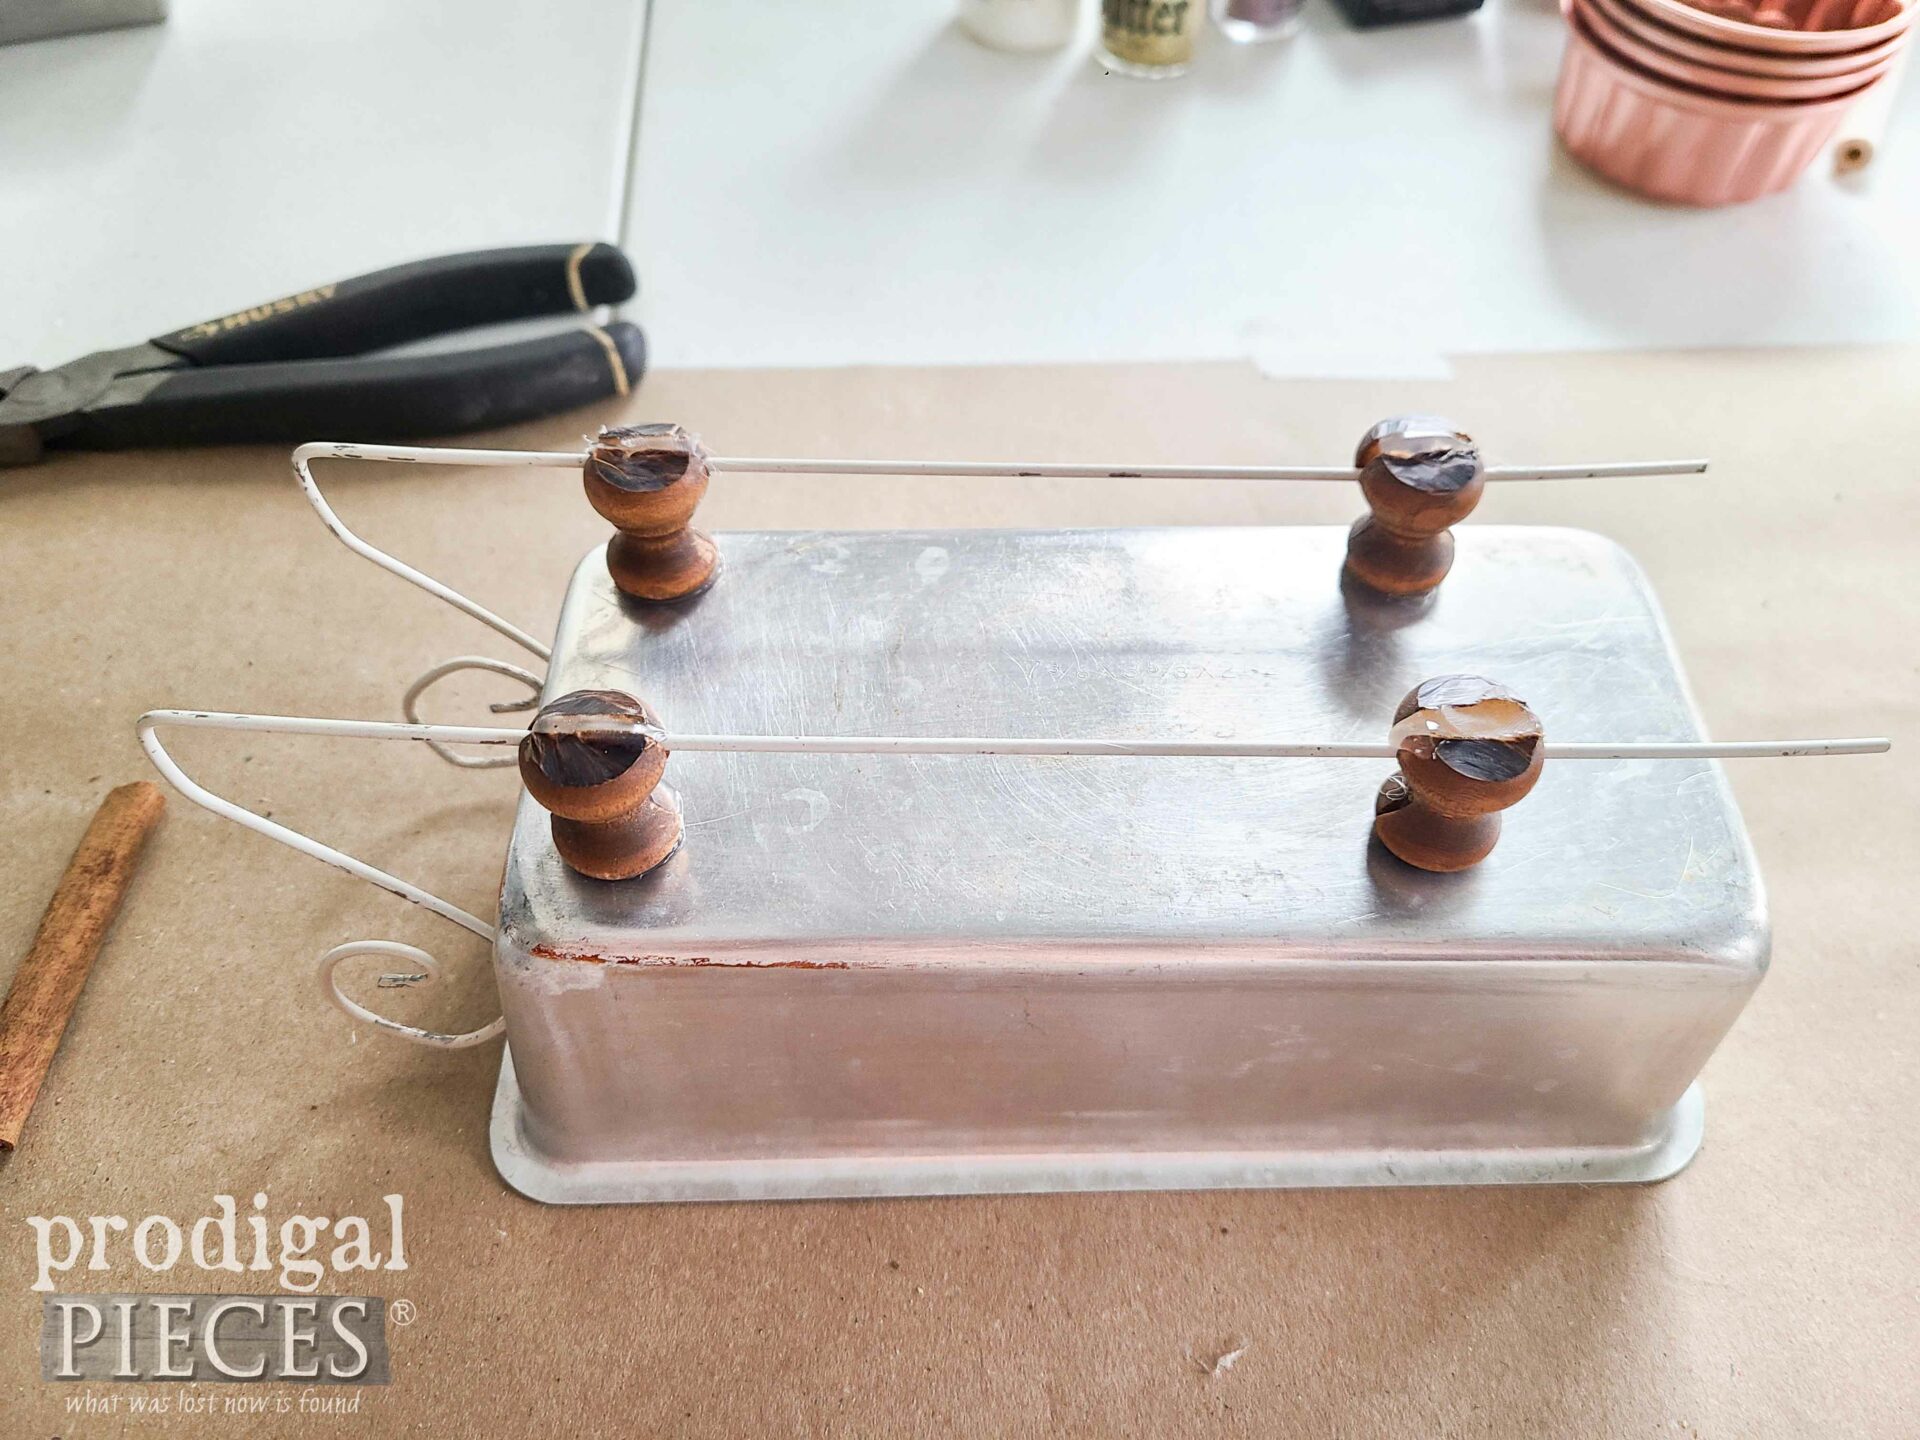 Repurposed Bread Pan Bottom with Wire Hanger Runners | prodigalpieces.com #prodigalpieces